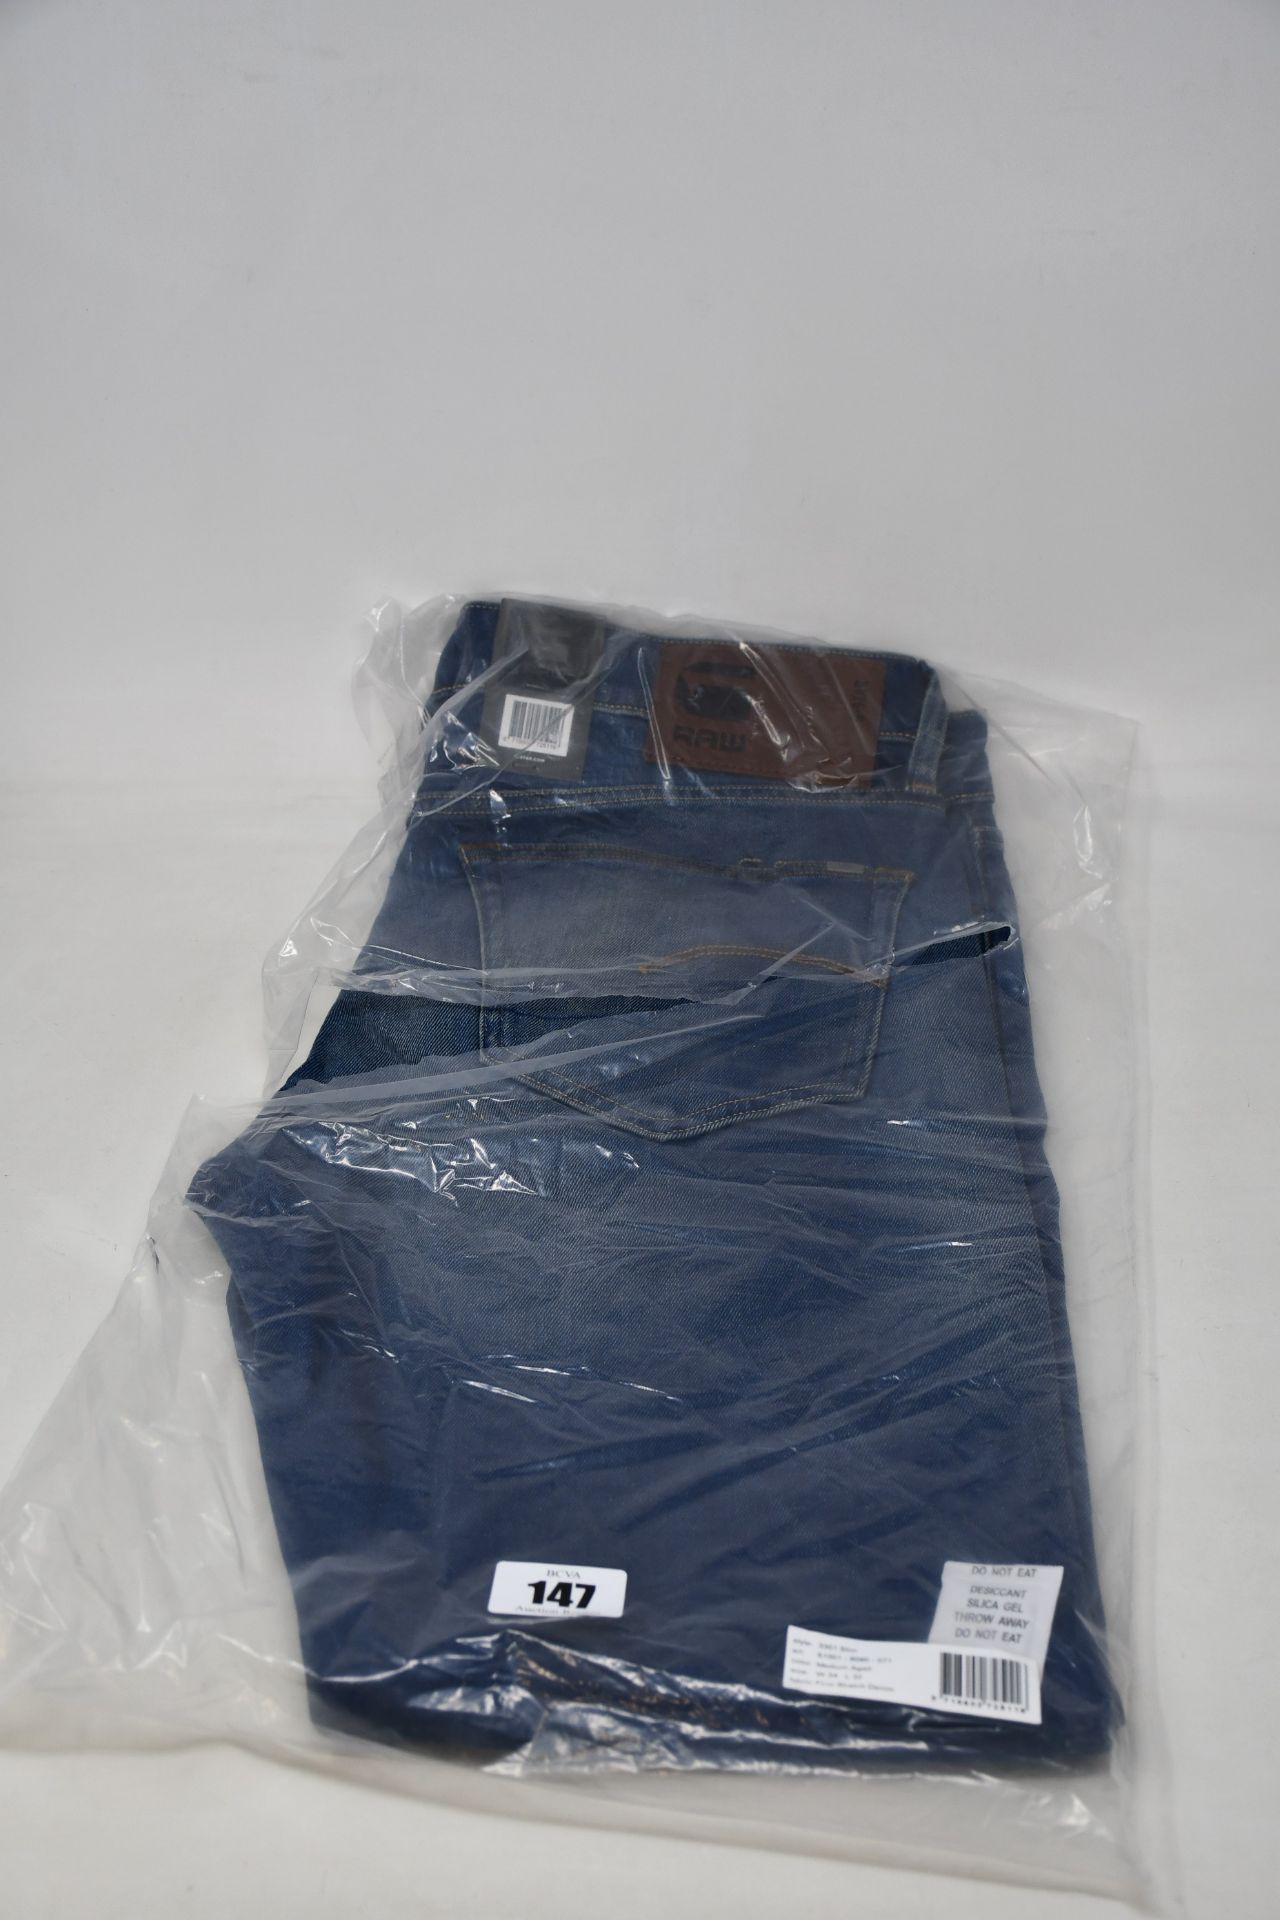 Four pairs of as new G-Star Raw jeans (All W34/L32).